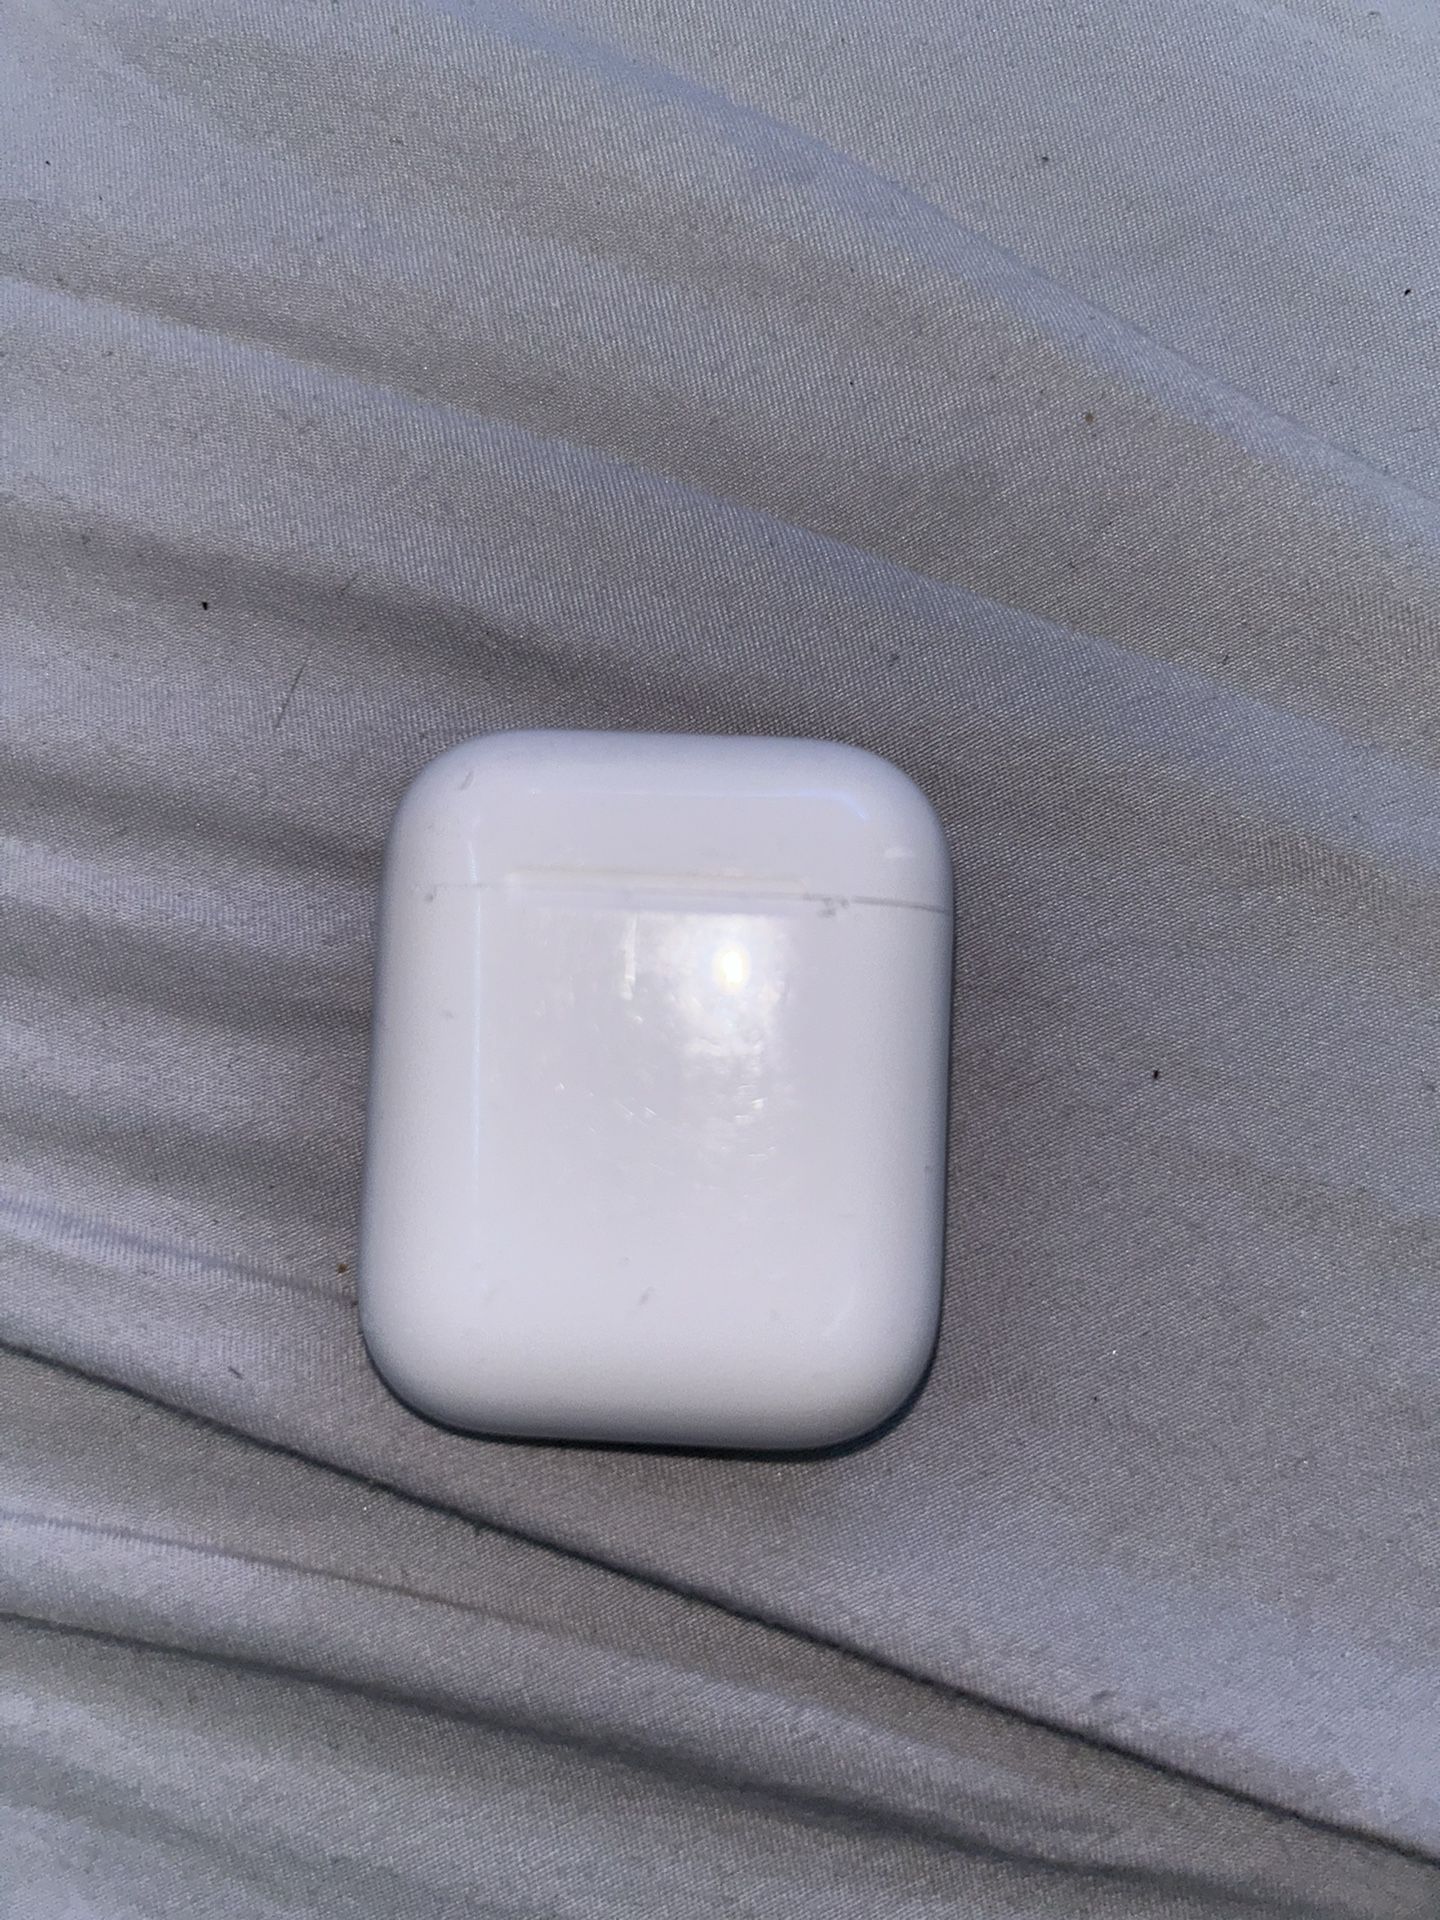 AirPods 2nd Case